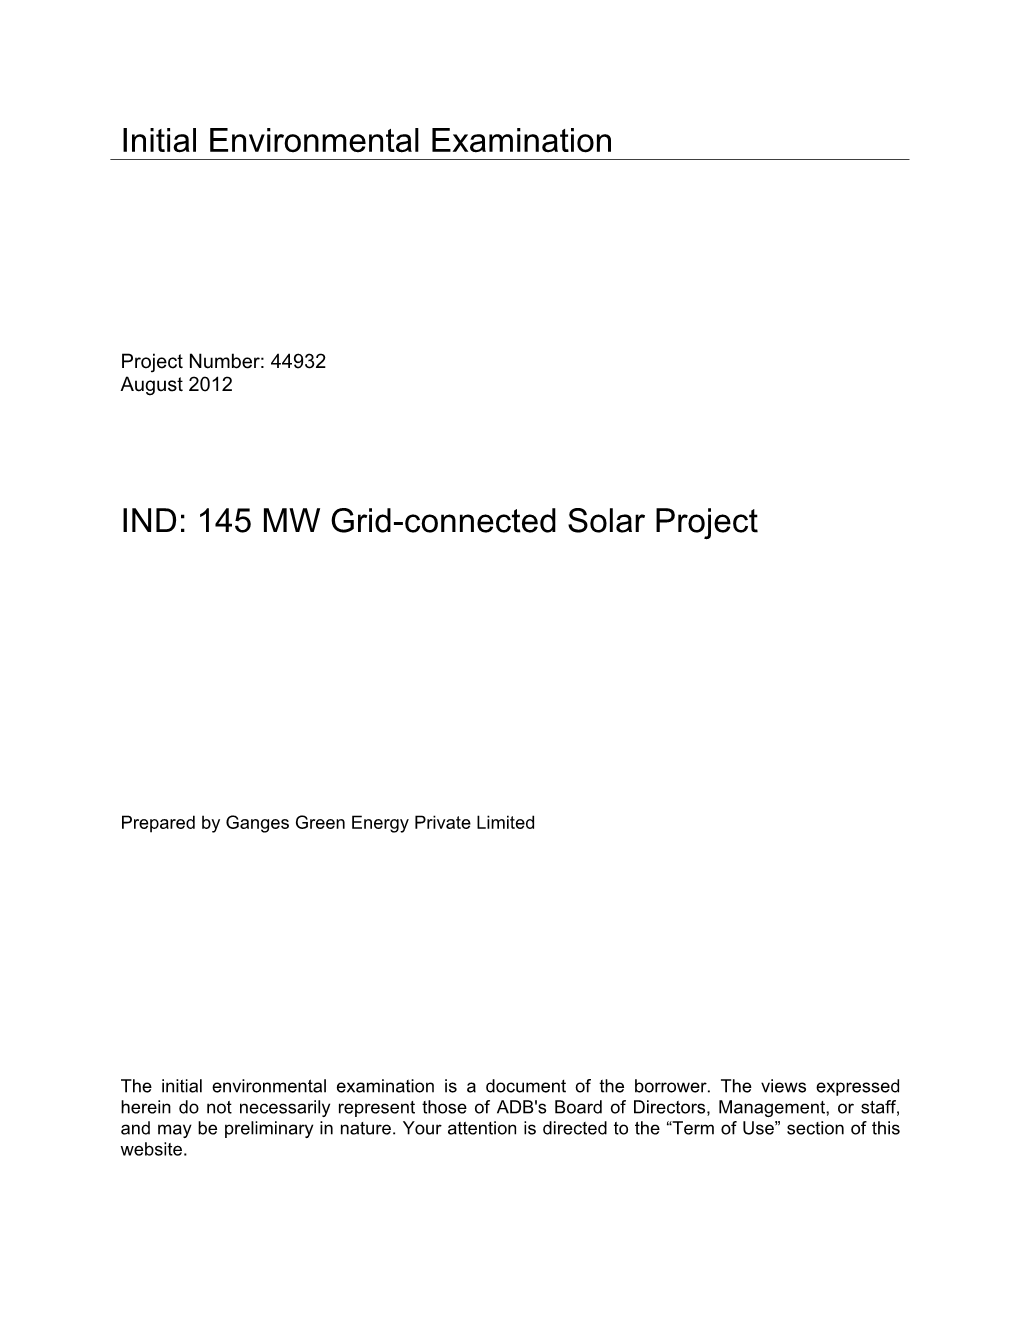 25 Mwp Ganges Solar Power Project